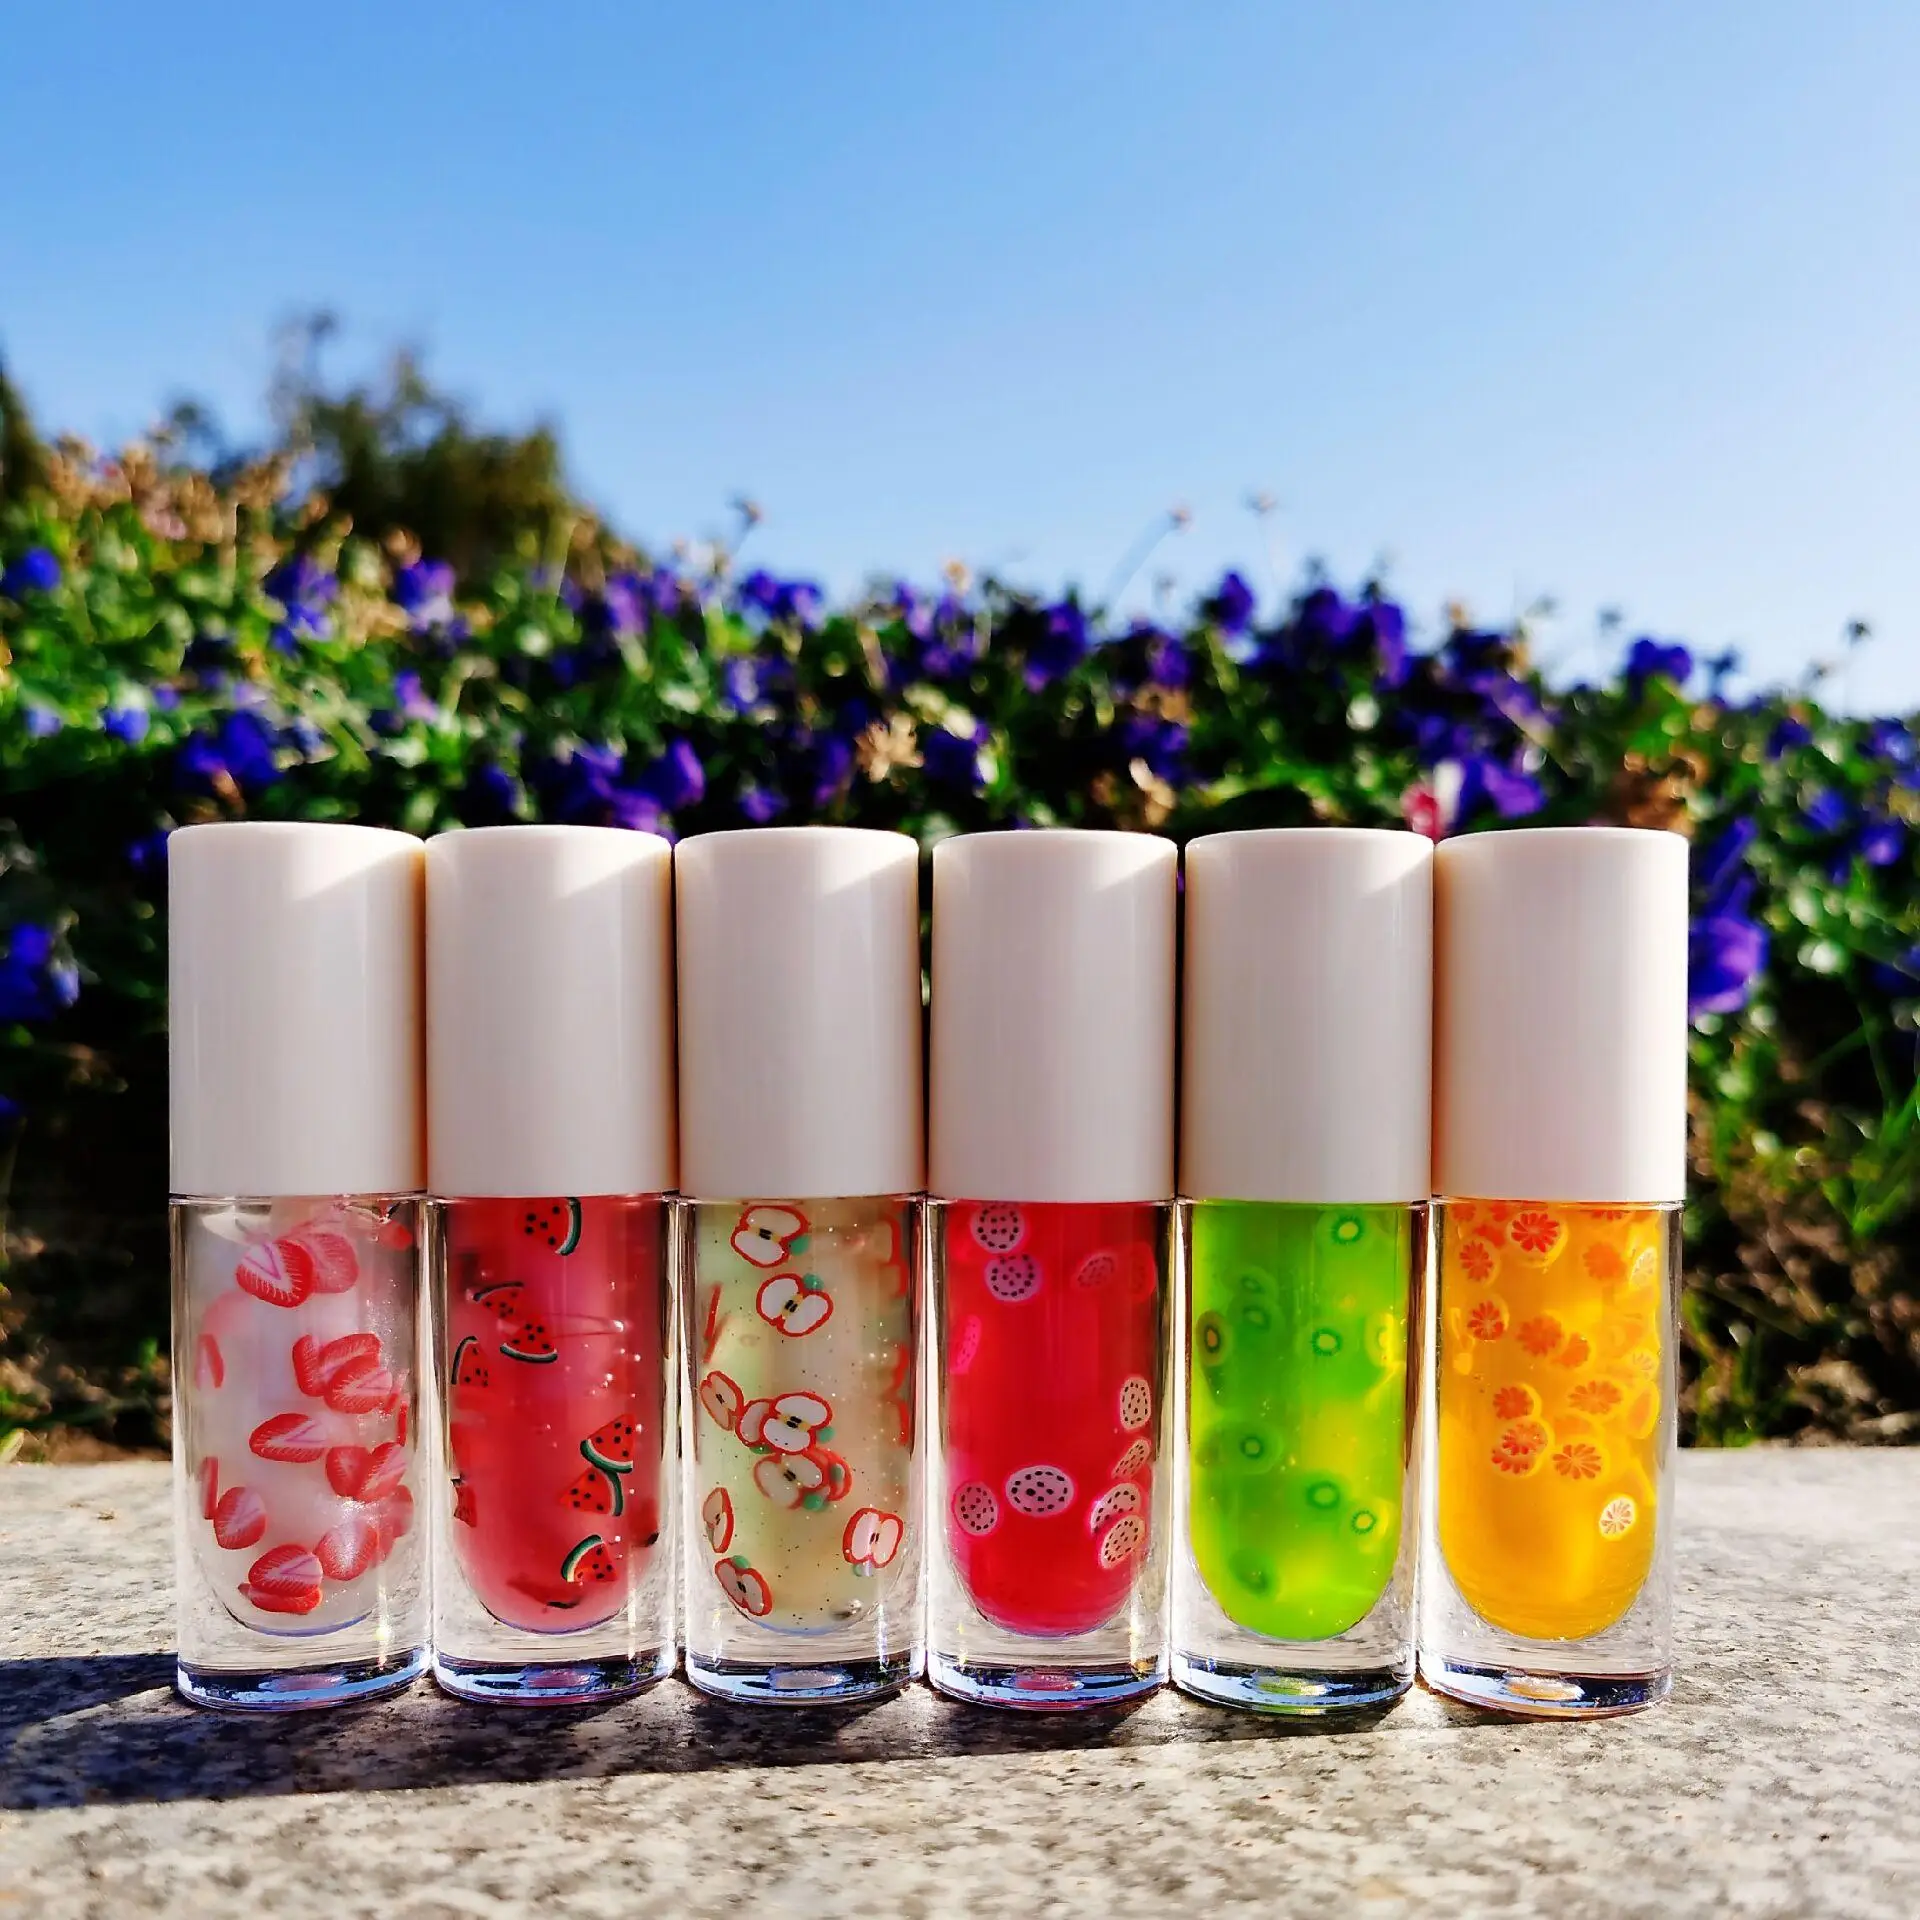 

2021 Lipgloss Base Private Label Vendor Clear Fruit Custom Kit Oil Girls Fruity Flavored Beauty Treats High Quality Lip Gloss